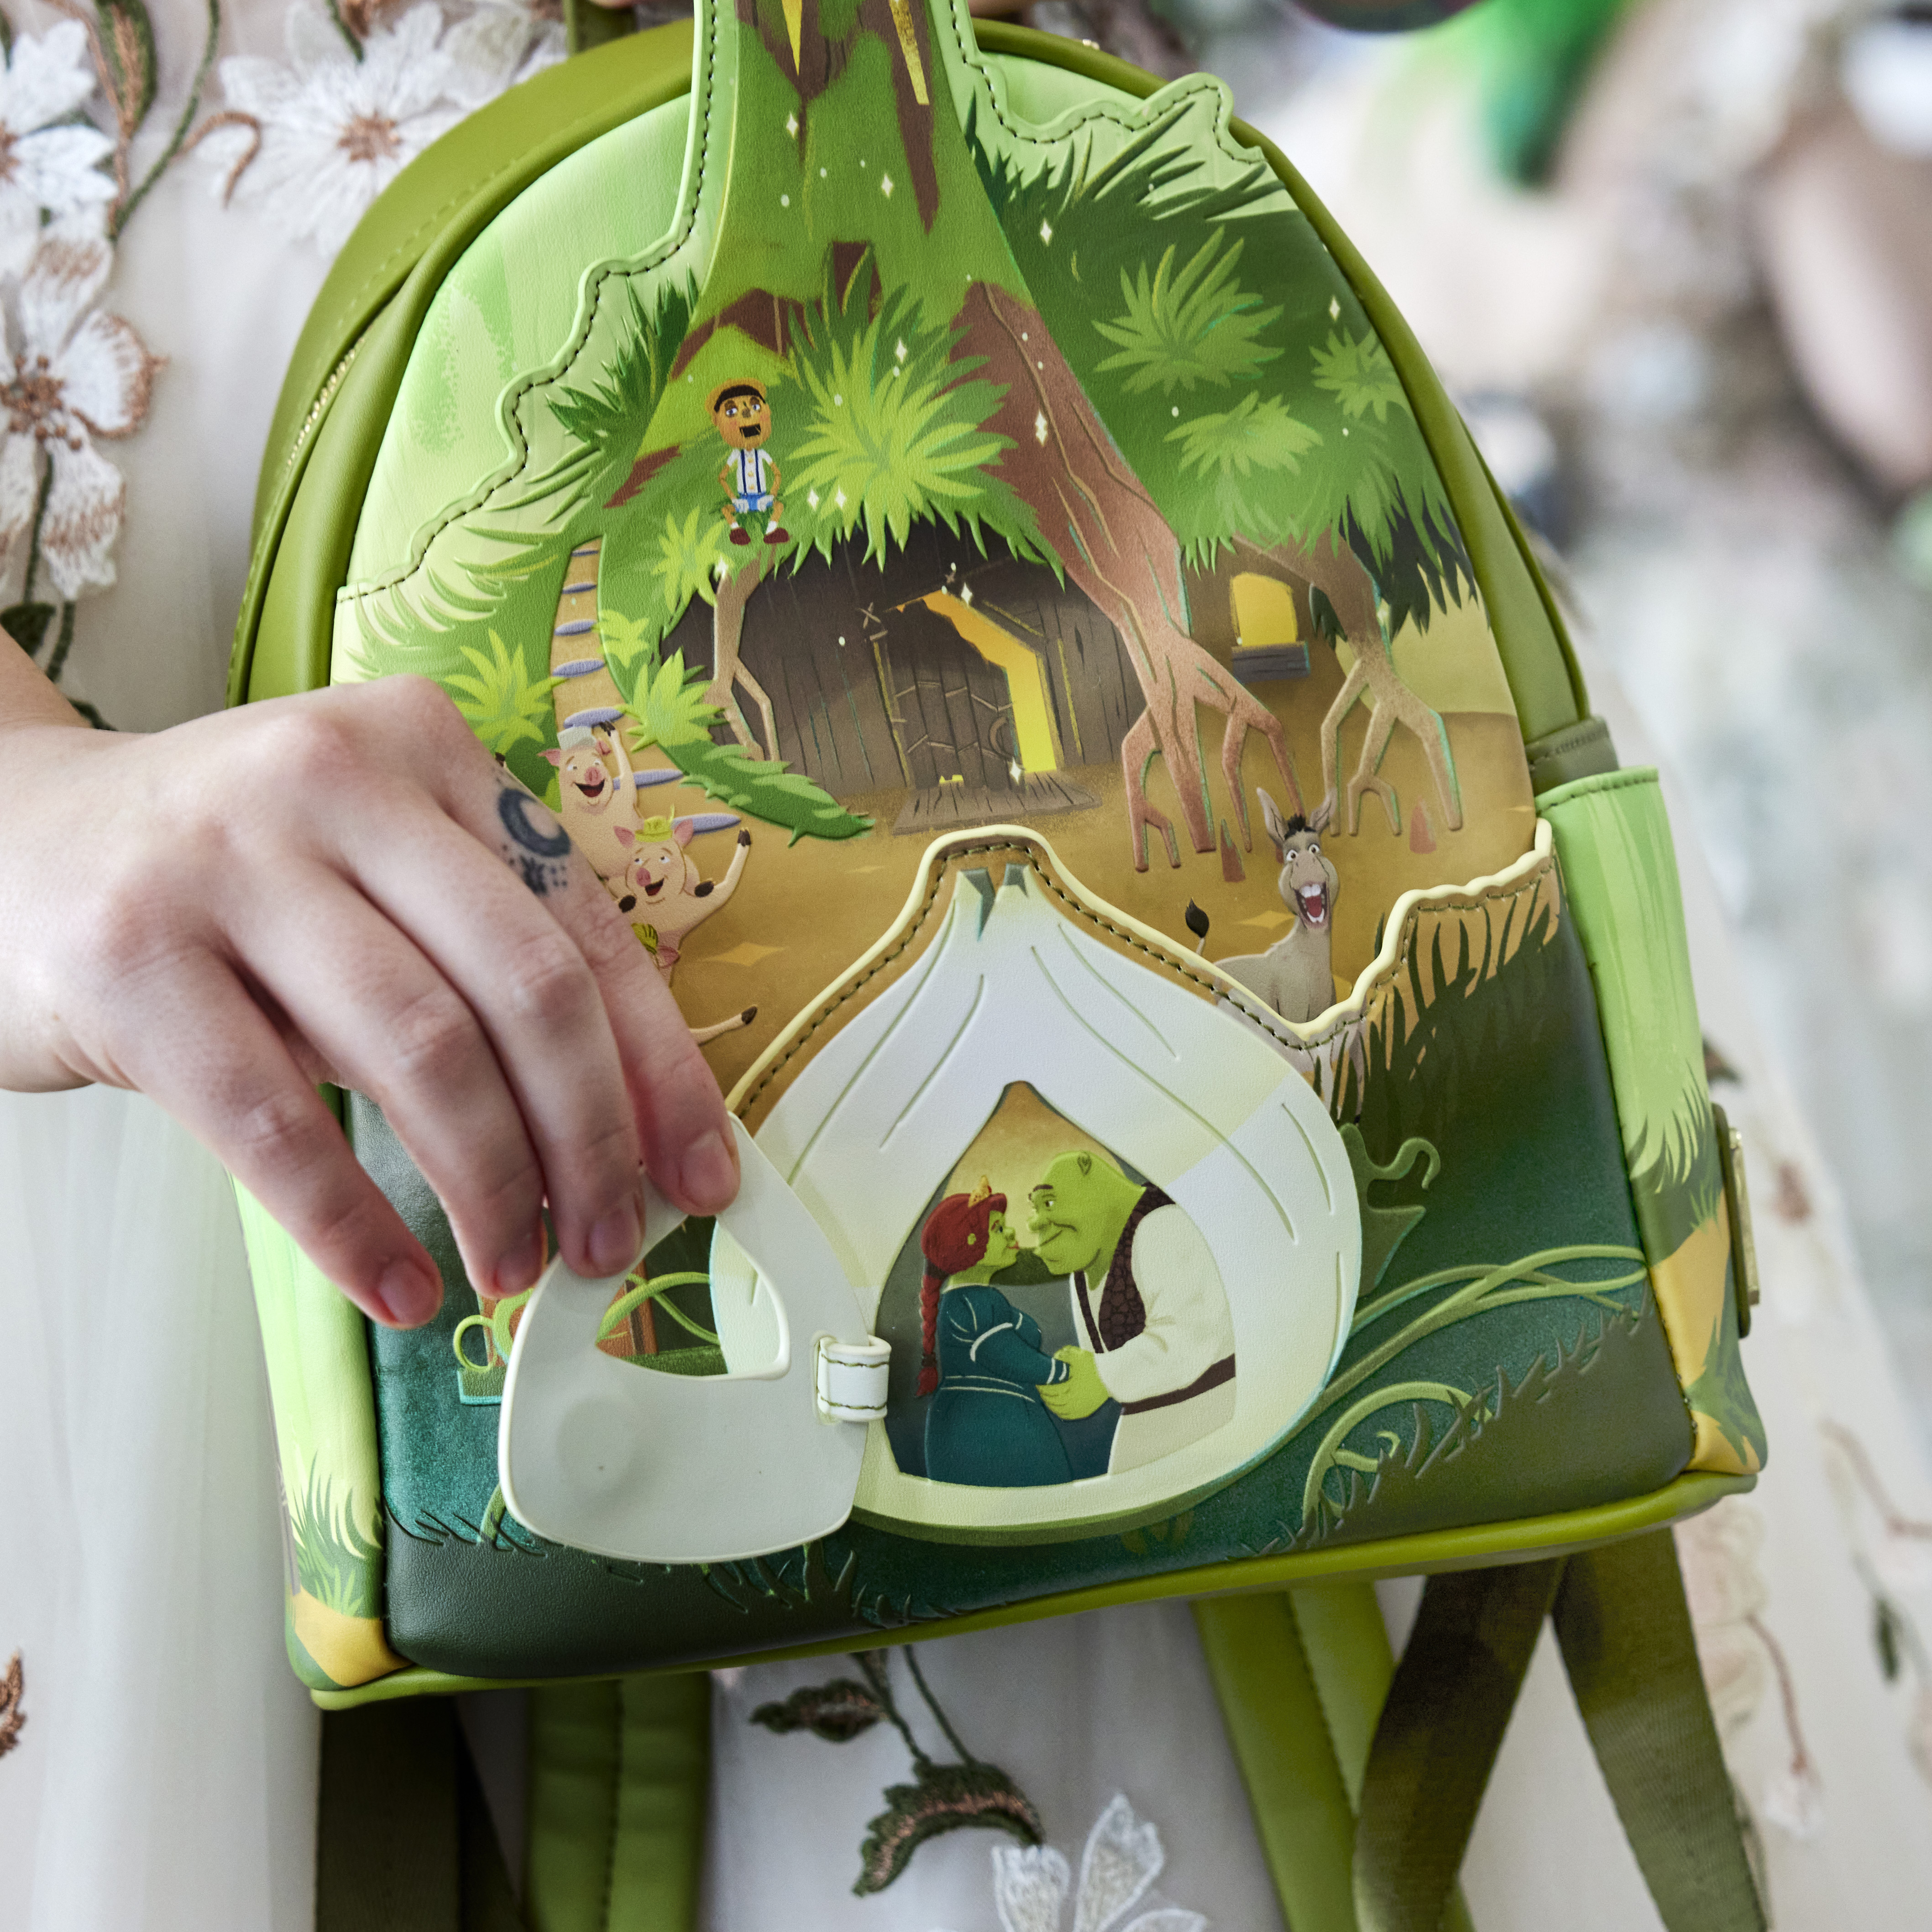 Woman holding the Shrek bag and holding open the onion carriage door to reveal Fiona and Shrek behind it.